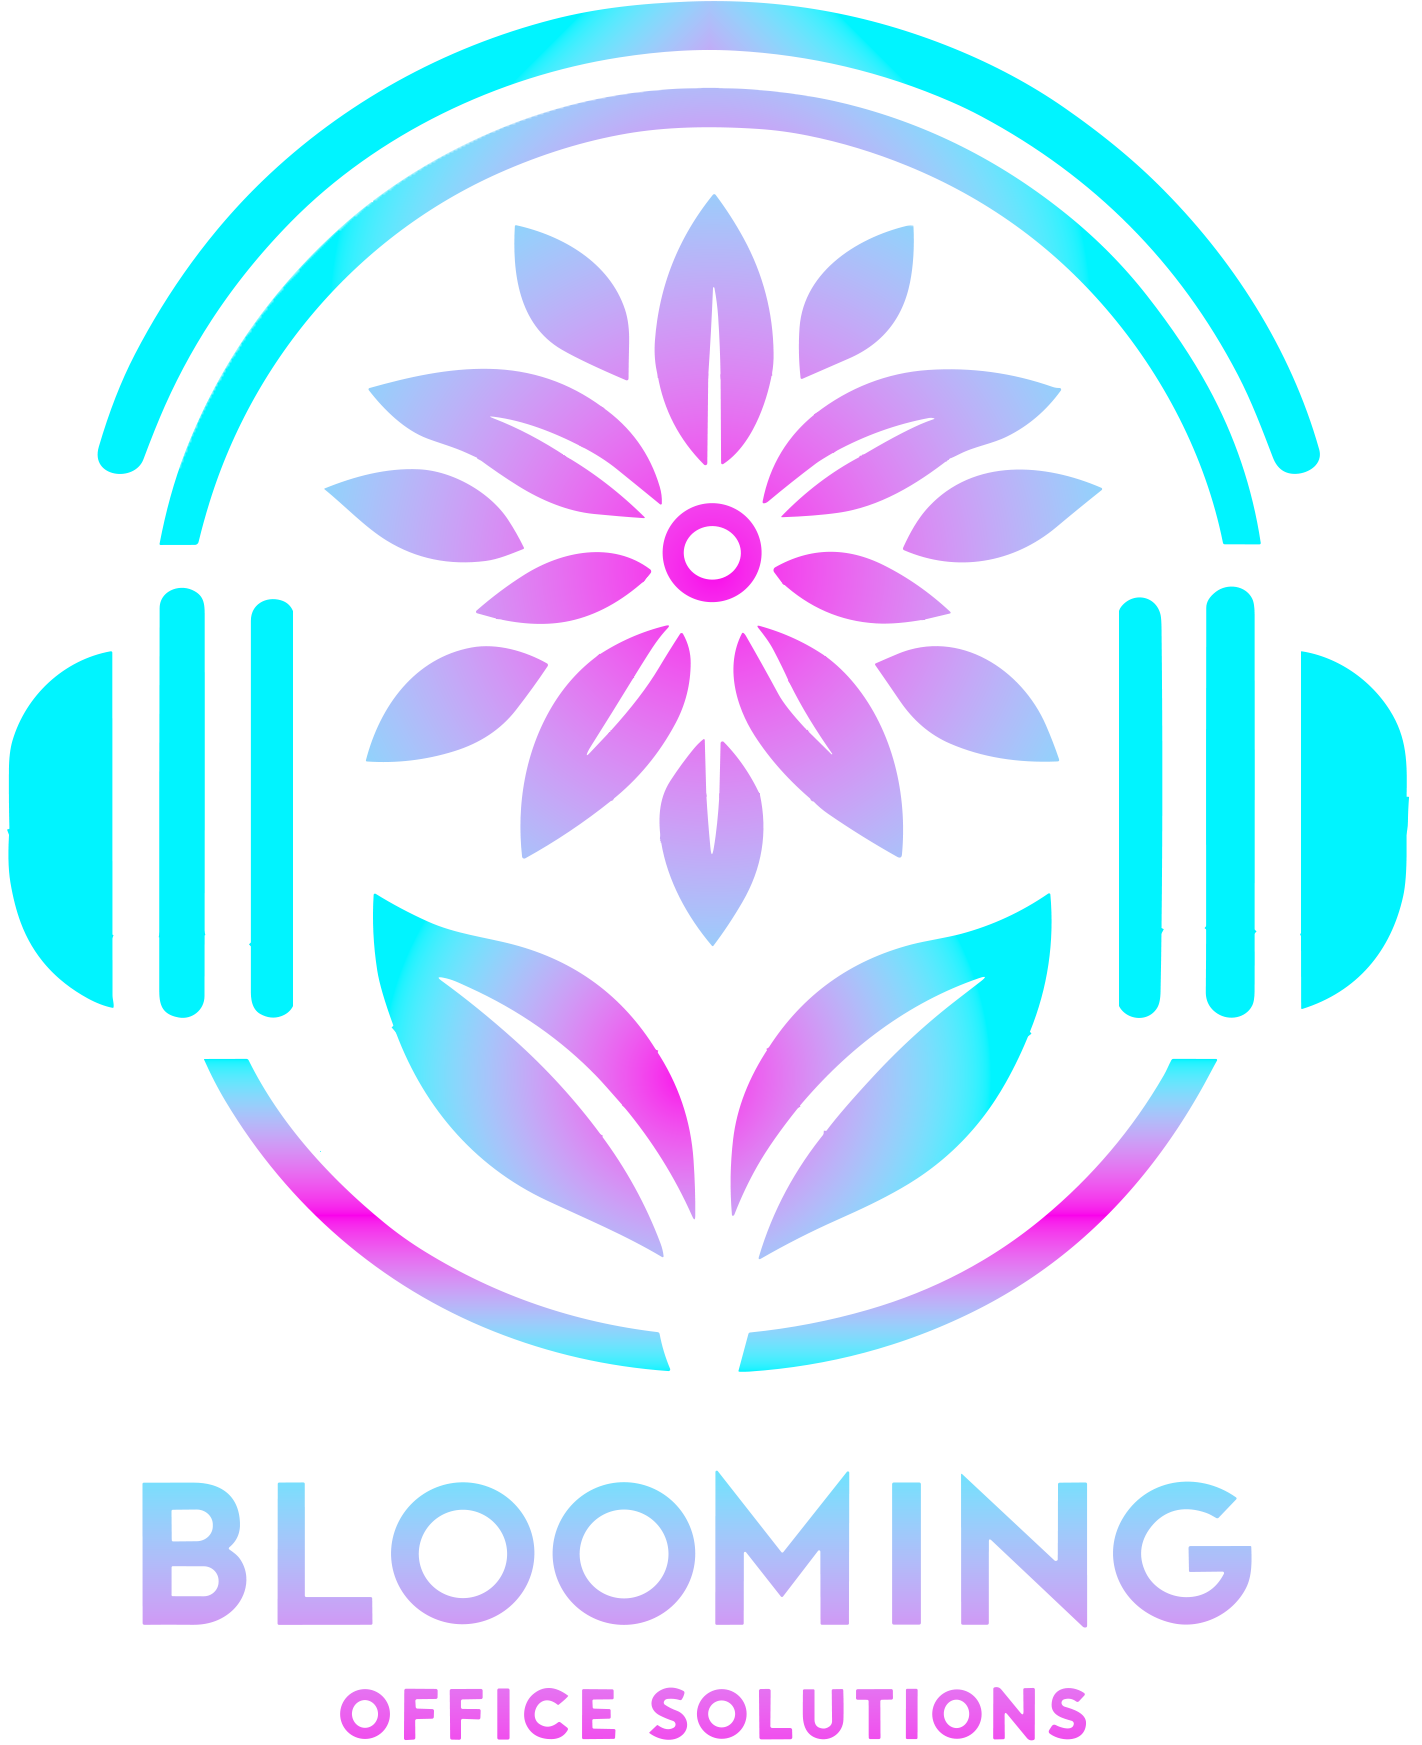 Blooming Office Solutions - Professional Virtual Assistants